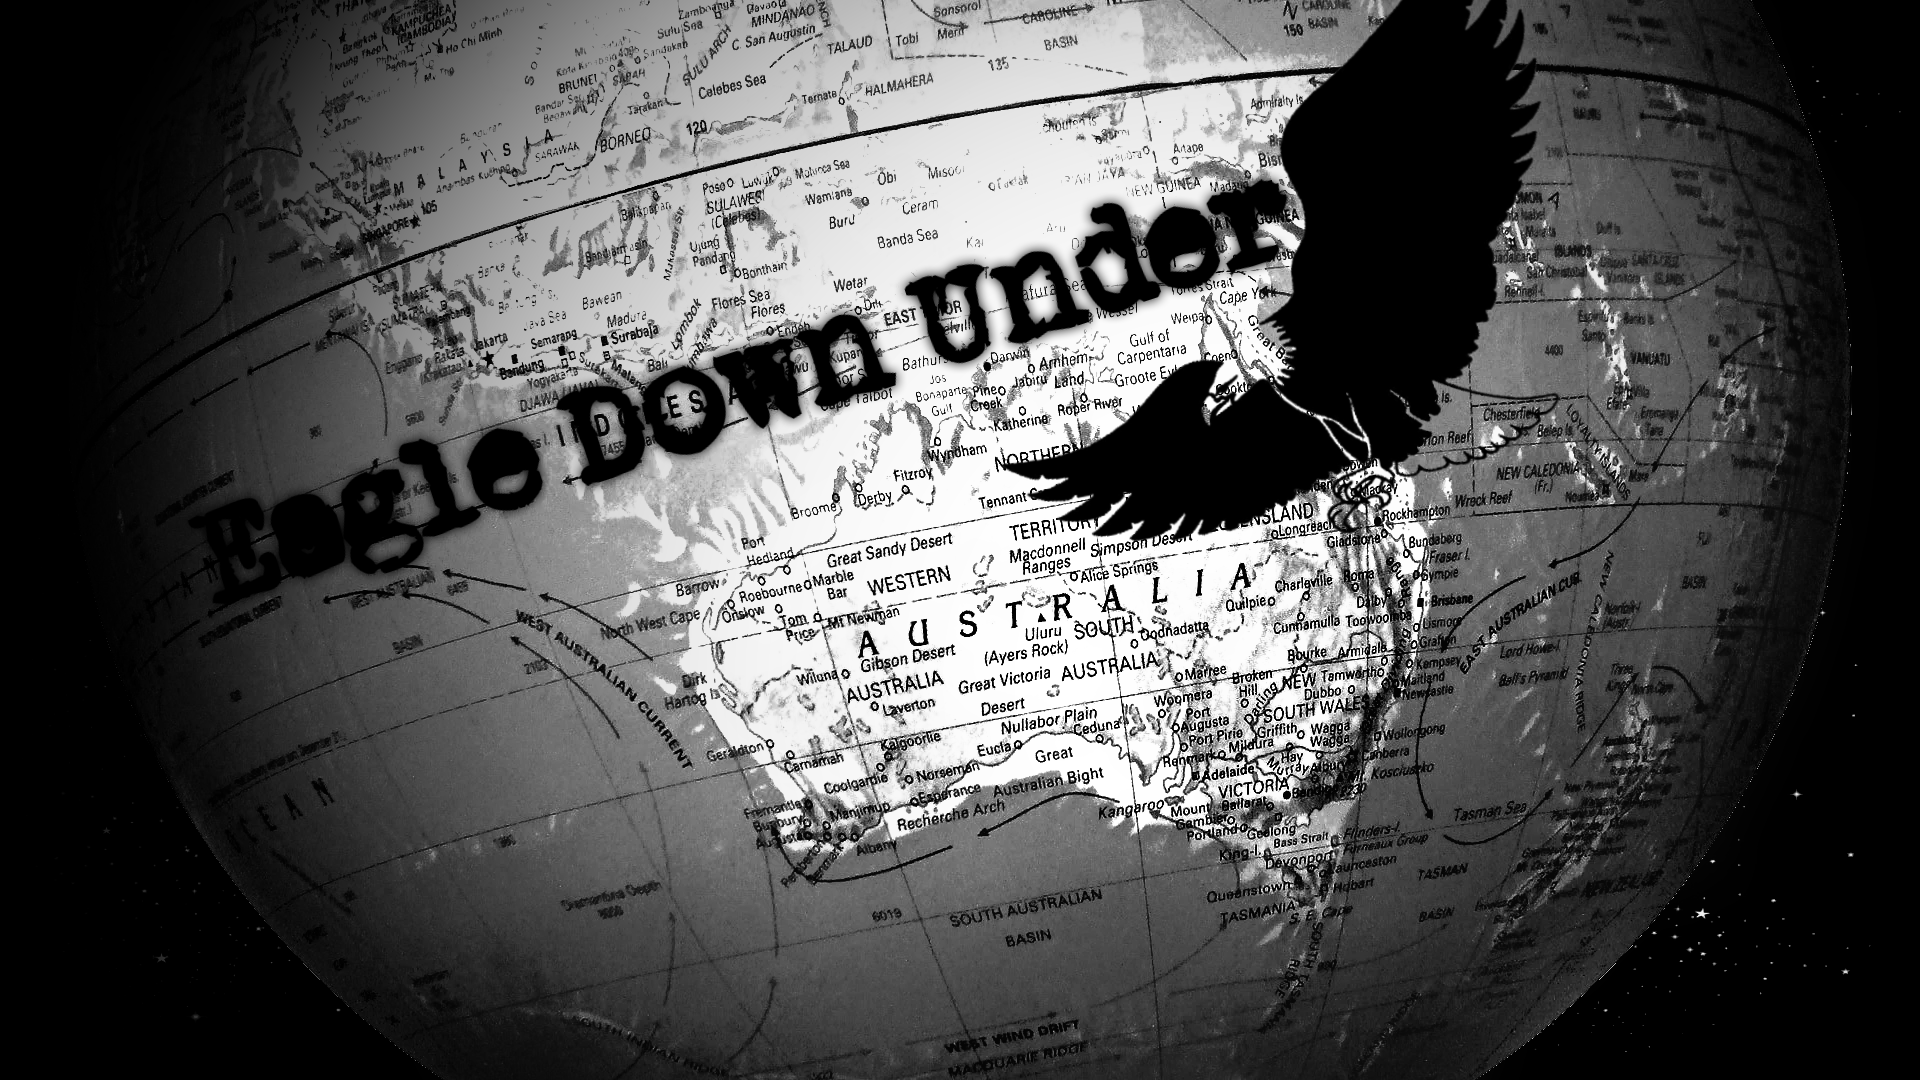 the_eagle_down_under__future_1983__doomsday_tl__by_louisthefox-dbgmwyf.png